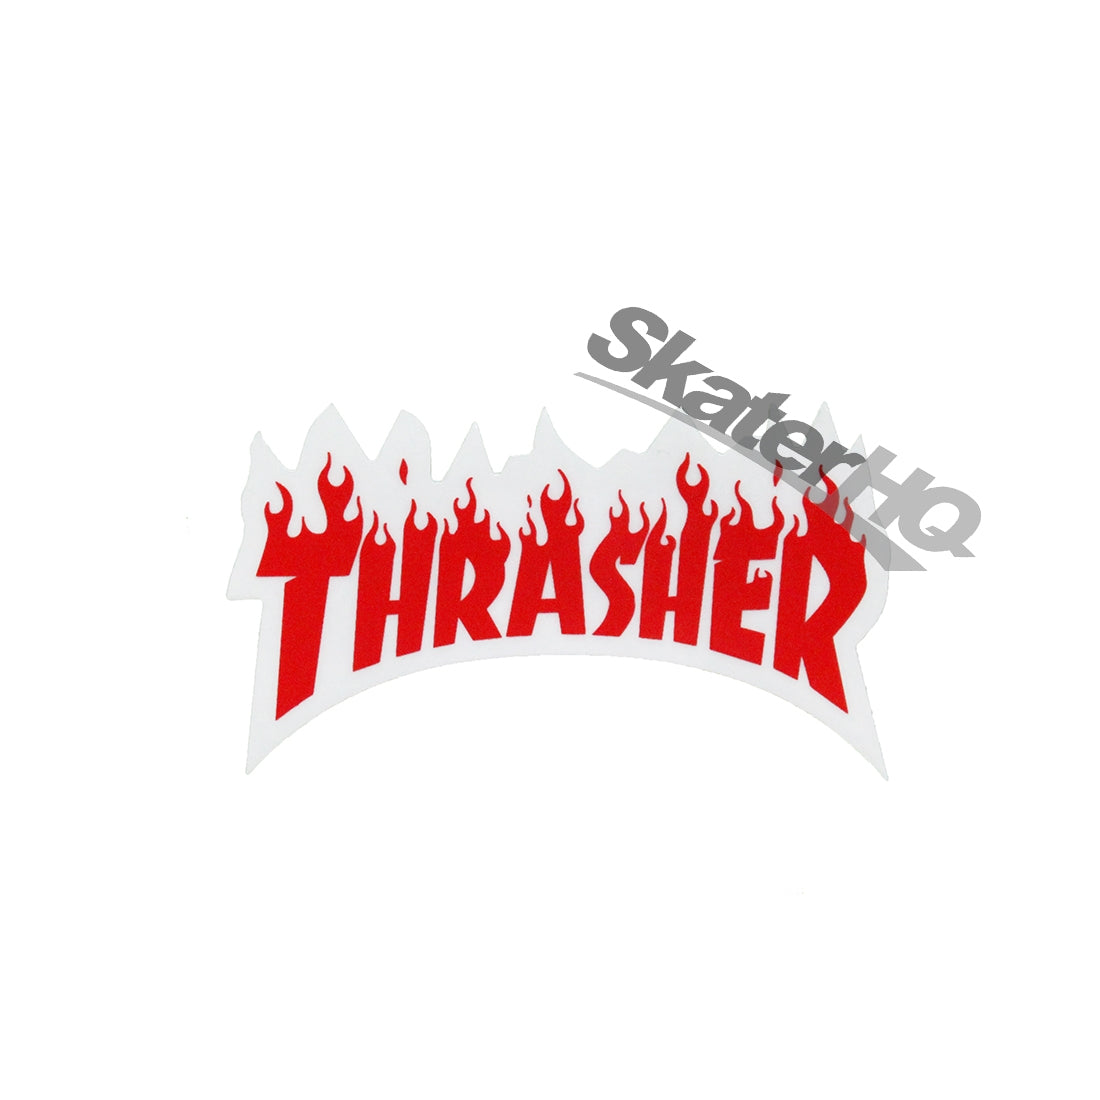 Thrasher Flame Mono Small Sticker - Red Stickers